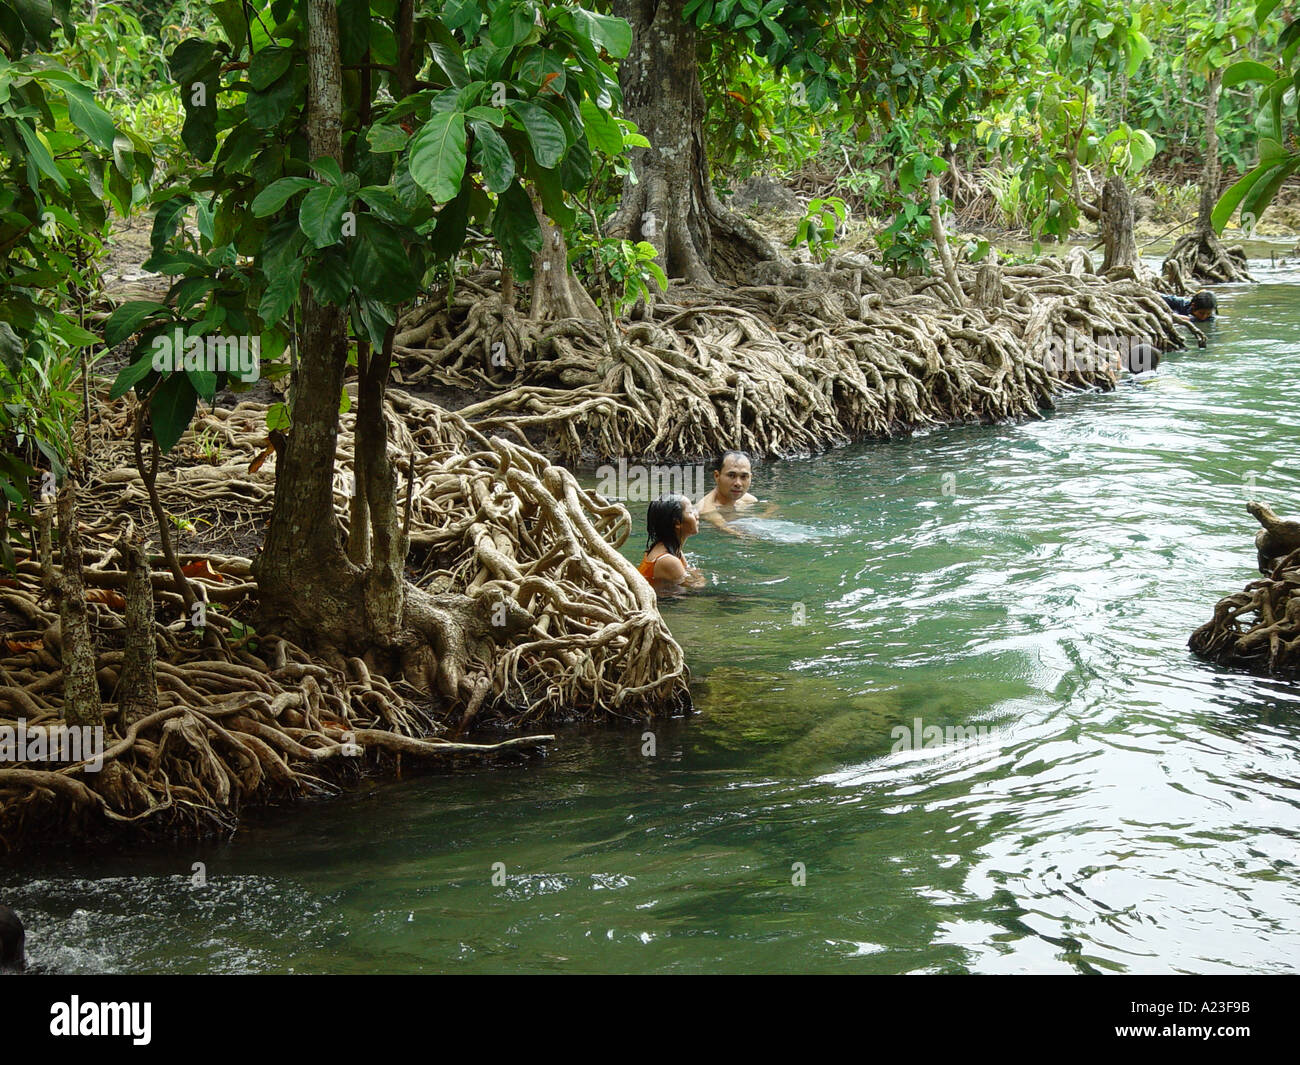 People in freshwater swimming along Eugenia trees in Thailand Stock Photo